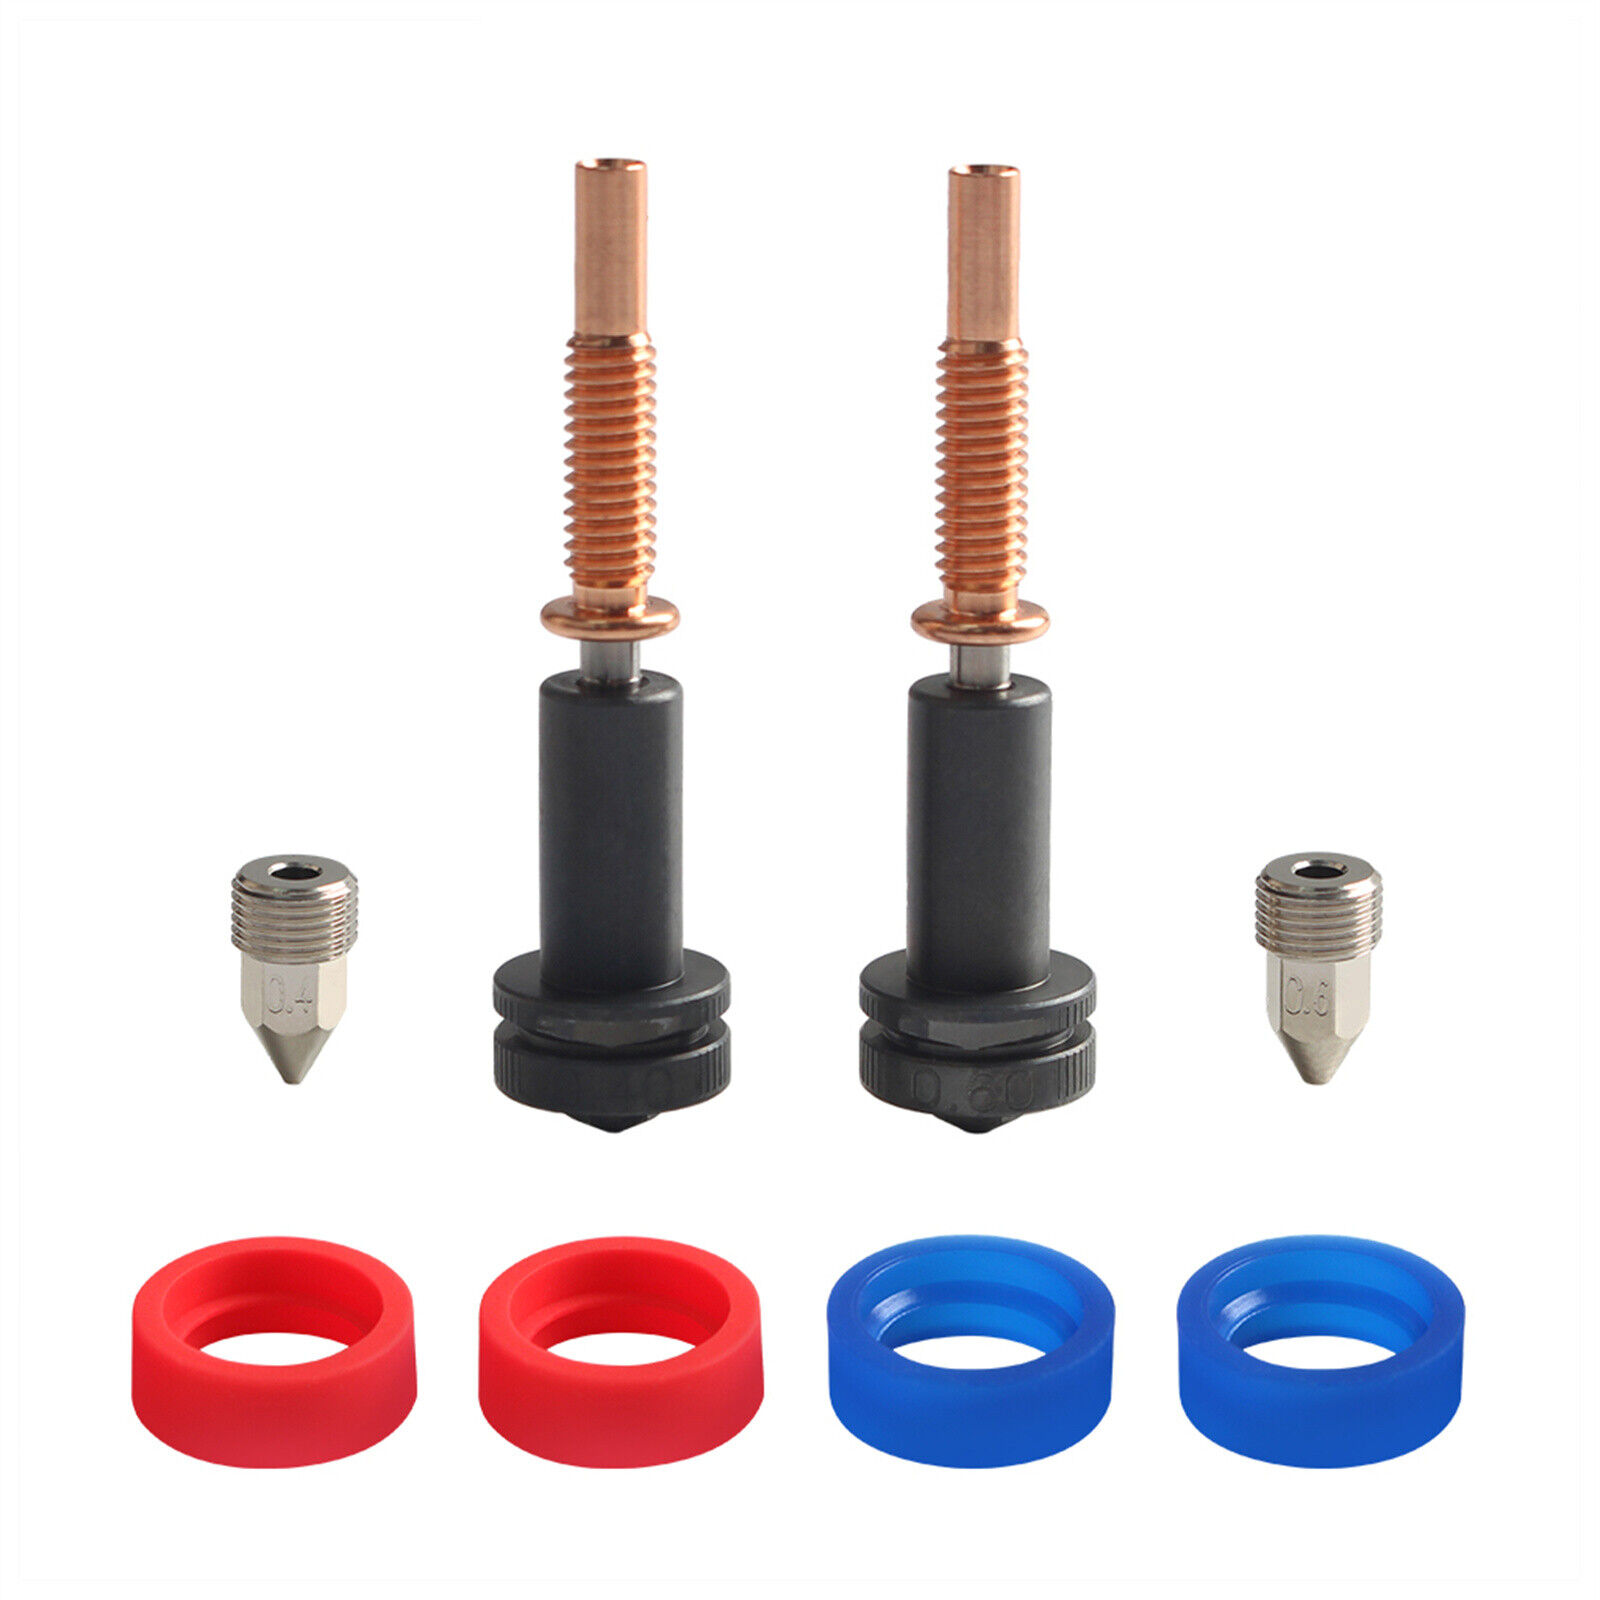 Upgraded High Flow 0.4mm/0.6mm Nozzles Hardened steel Material For REVO Hotends